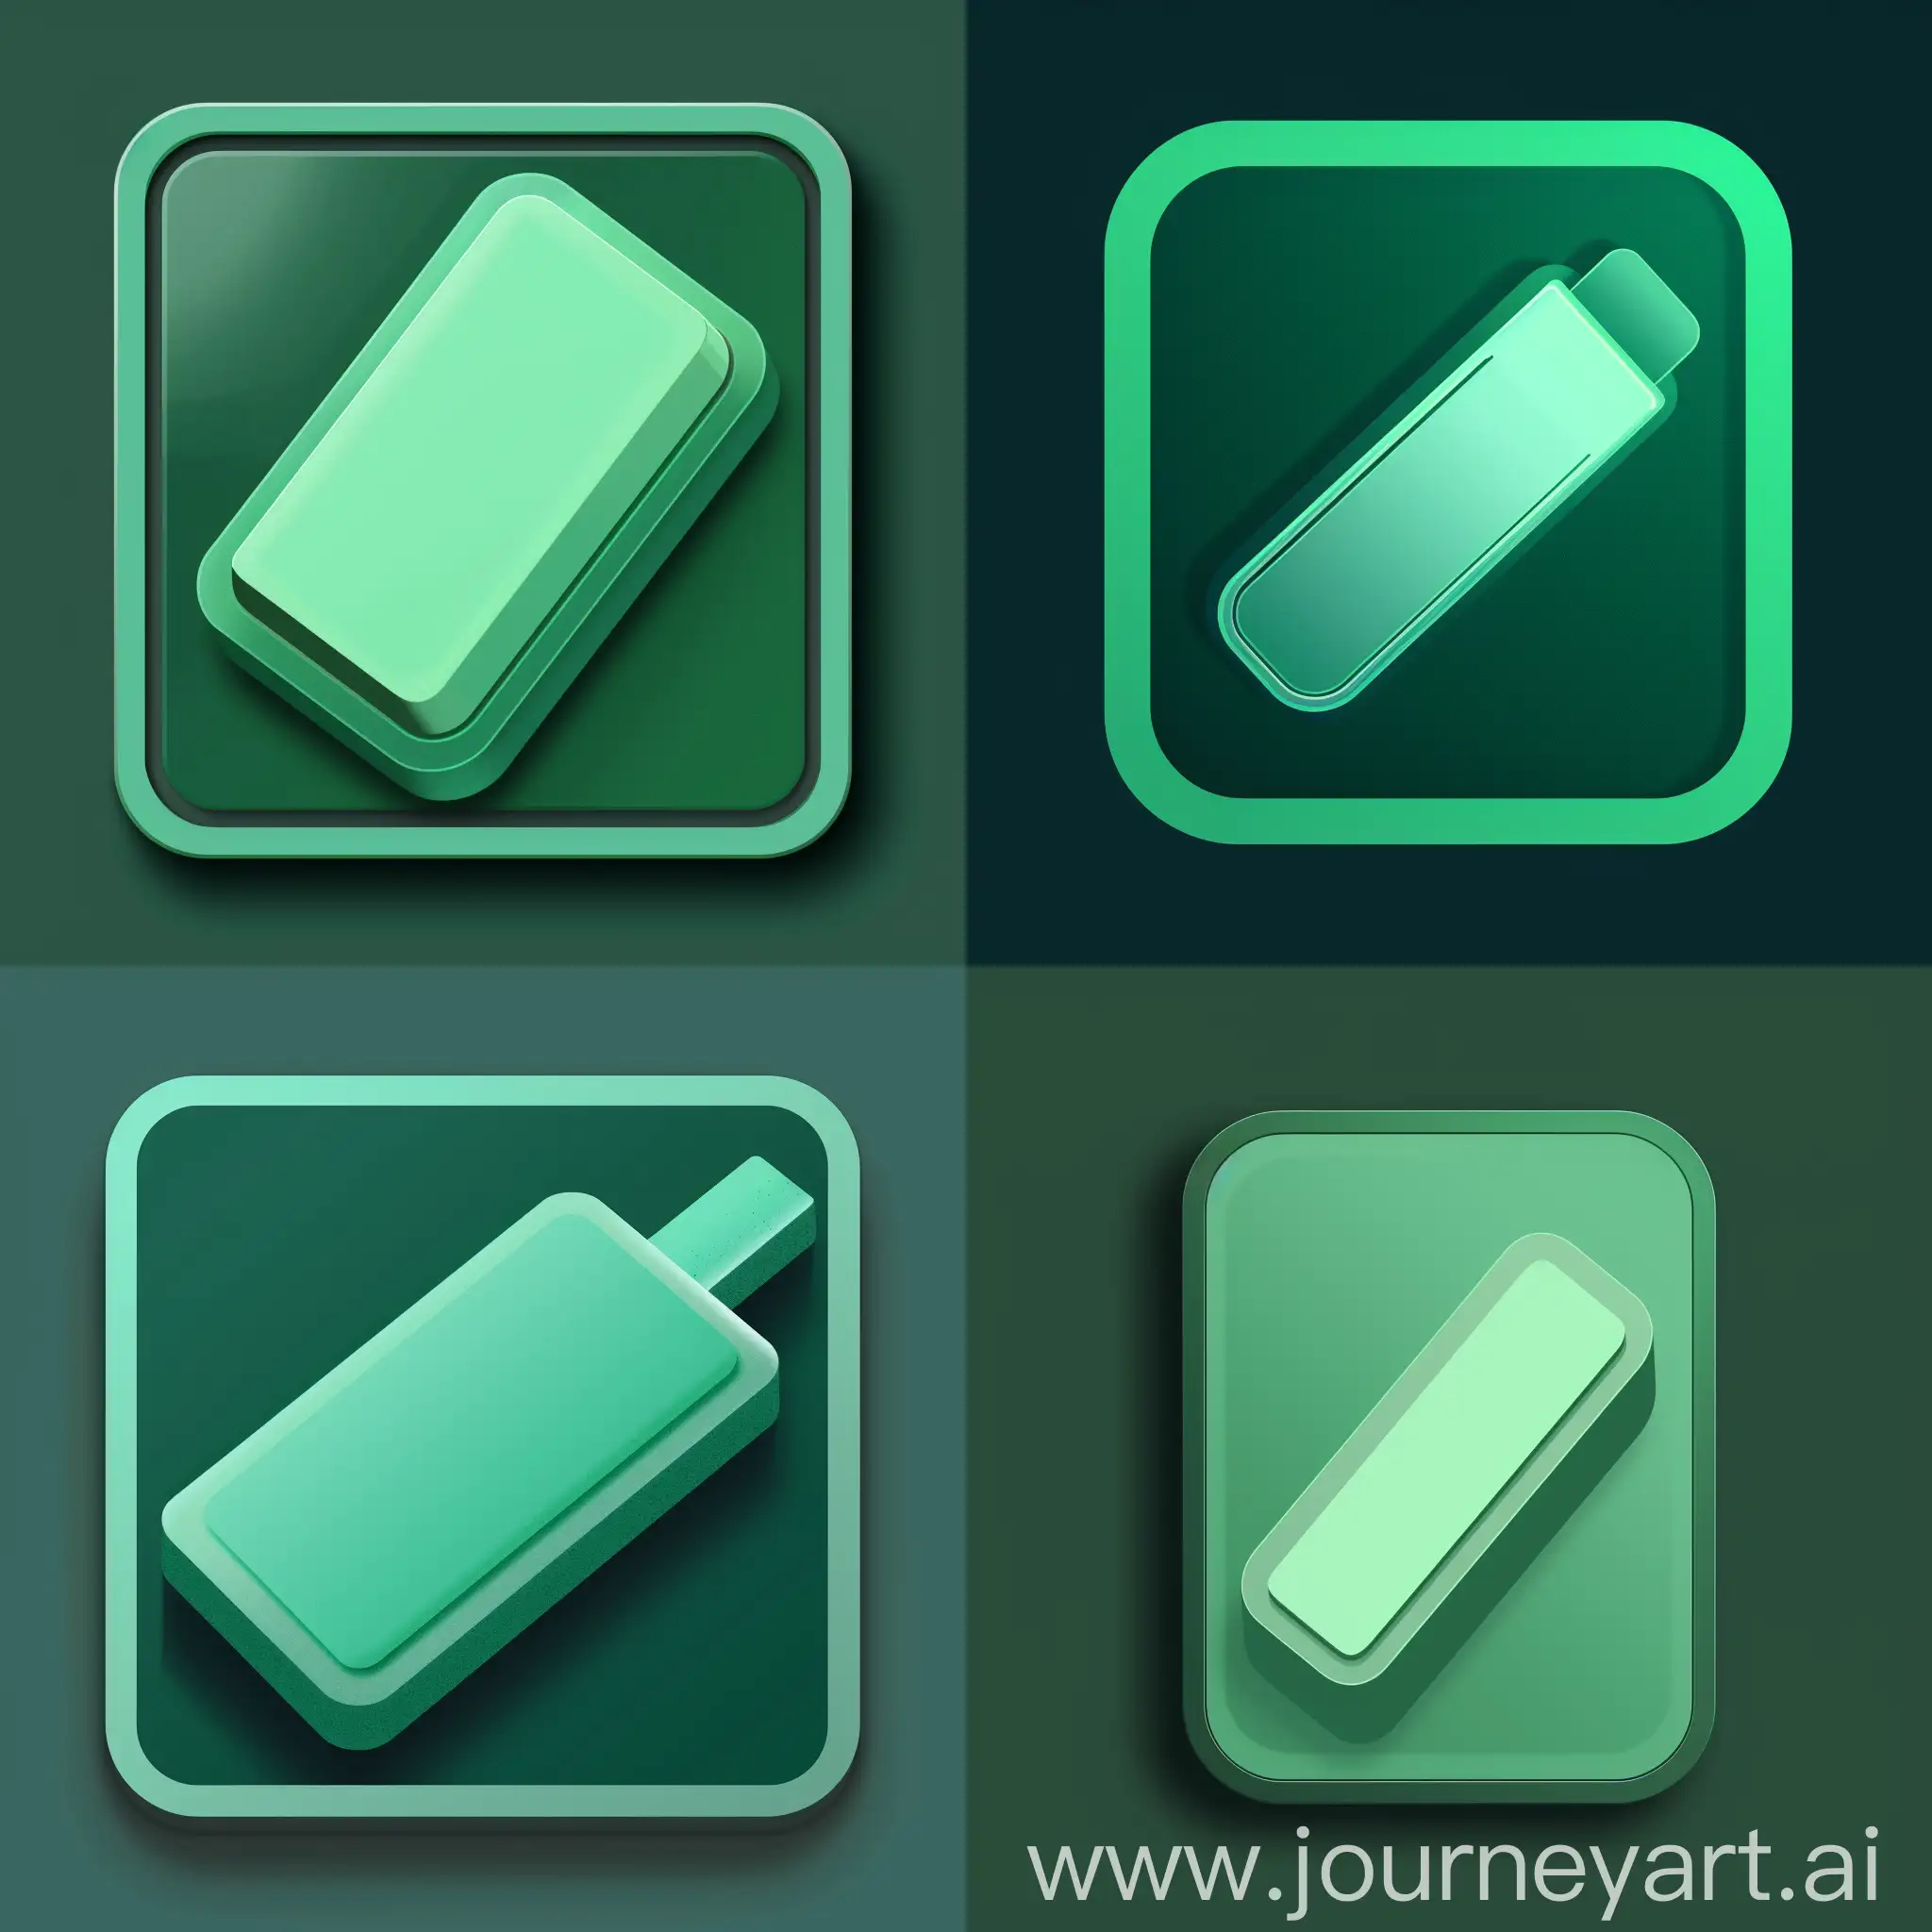 Minimalist-Green-Eraser-Icon-for-Object-Removal-App